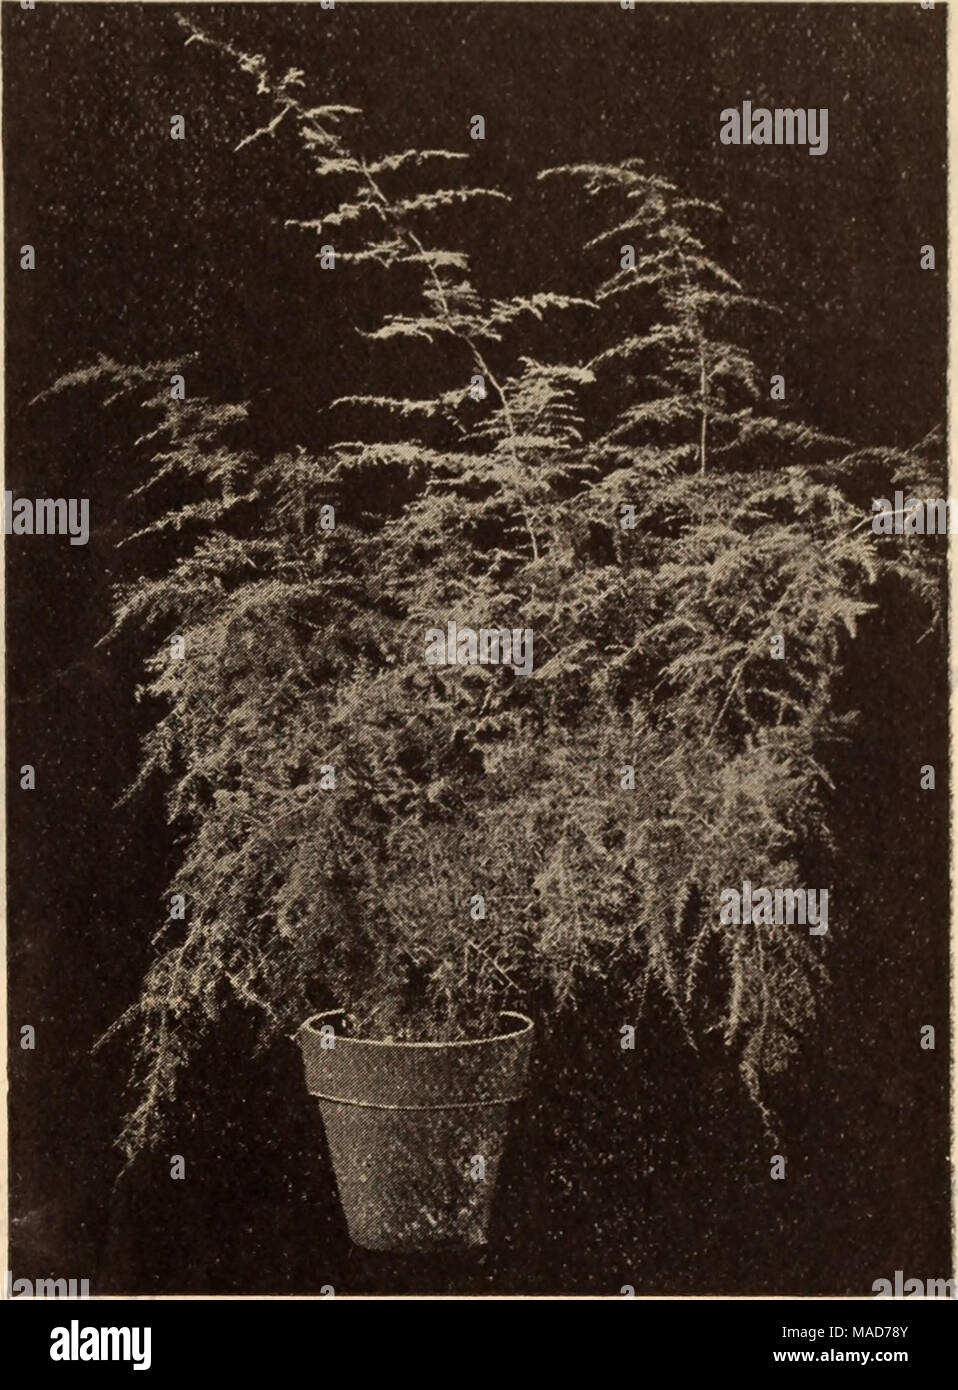 . Dreer's wholesale price list / Henry A. Dreer. . ASPARAGUS PLUMOSUS HATCHERI Arctotis (African Daisy). Orandis. White tinged lilac. A good cut flower . Tr. pkt. Oz. 15 40 in quantity by every dreer's snapdragons Asparagus. The varieties here offered are wanted florist, always in strong demand. Plumosus Hatcheri. We are handling the crop of the originator of this fine variety; it is of very rapid growth, closely jointed, and considered the finest type for strings and equally valuable for bunching. $1.00 per 100 seeds; $7.50 per 1000 seeds. Plumosus nanus. We offer an extra choice lot of green Stock Photo